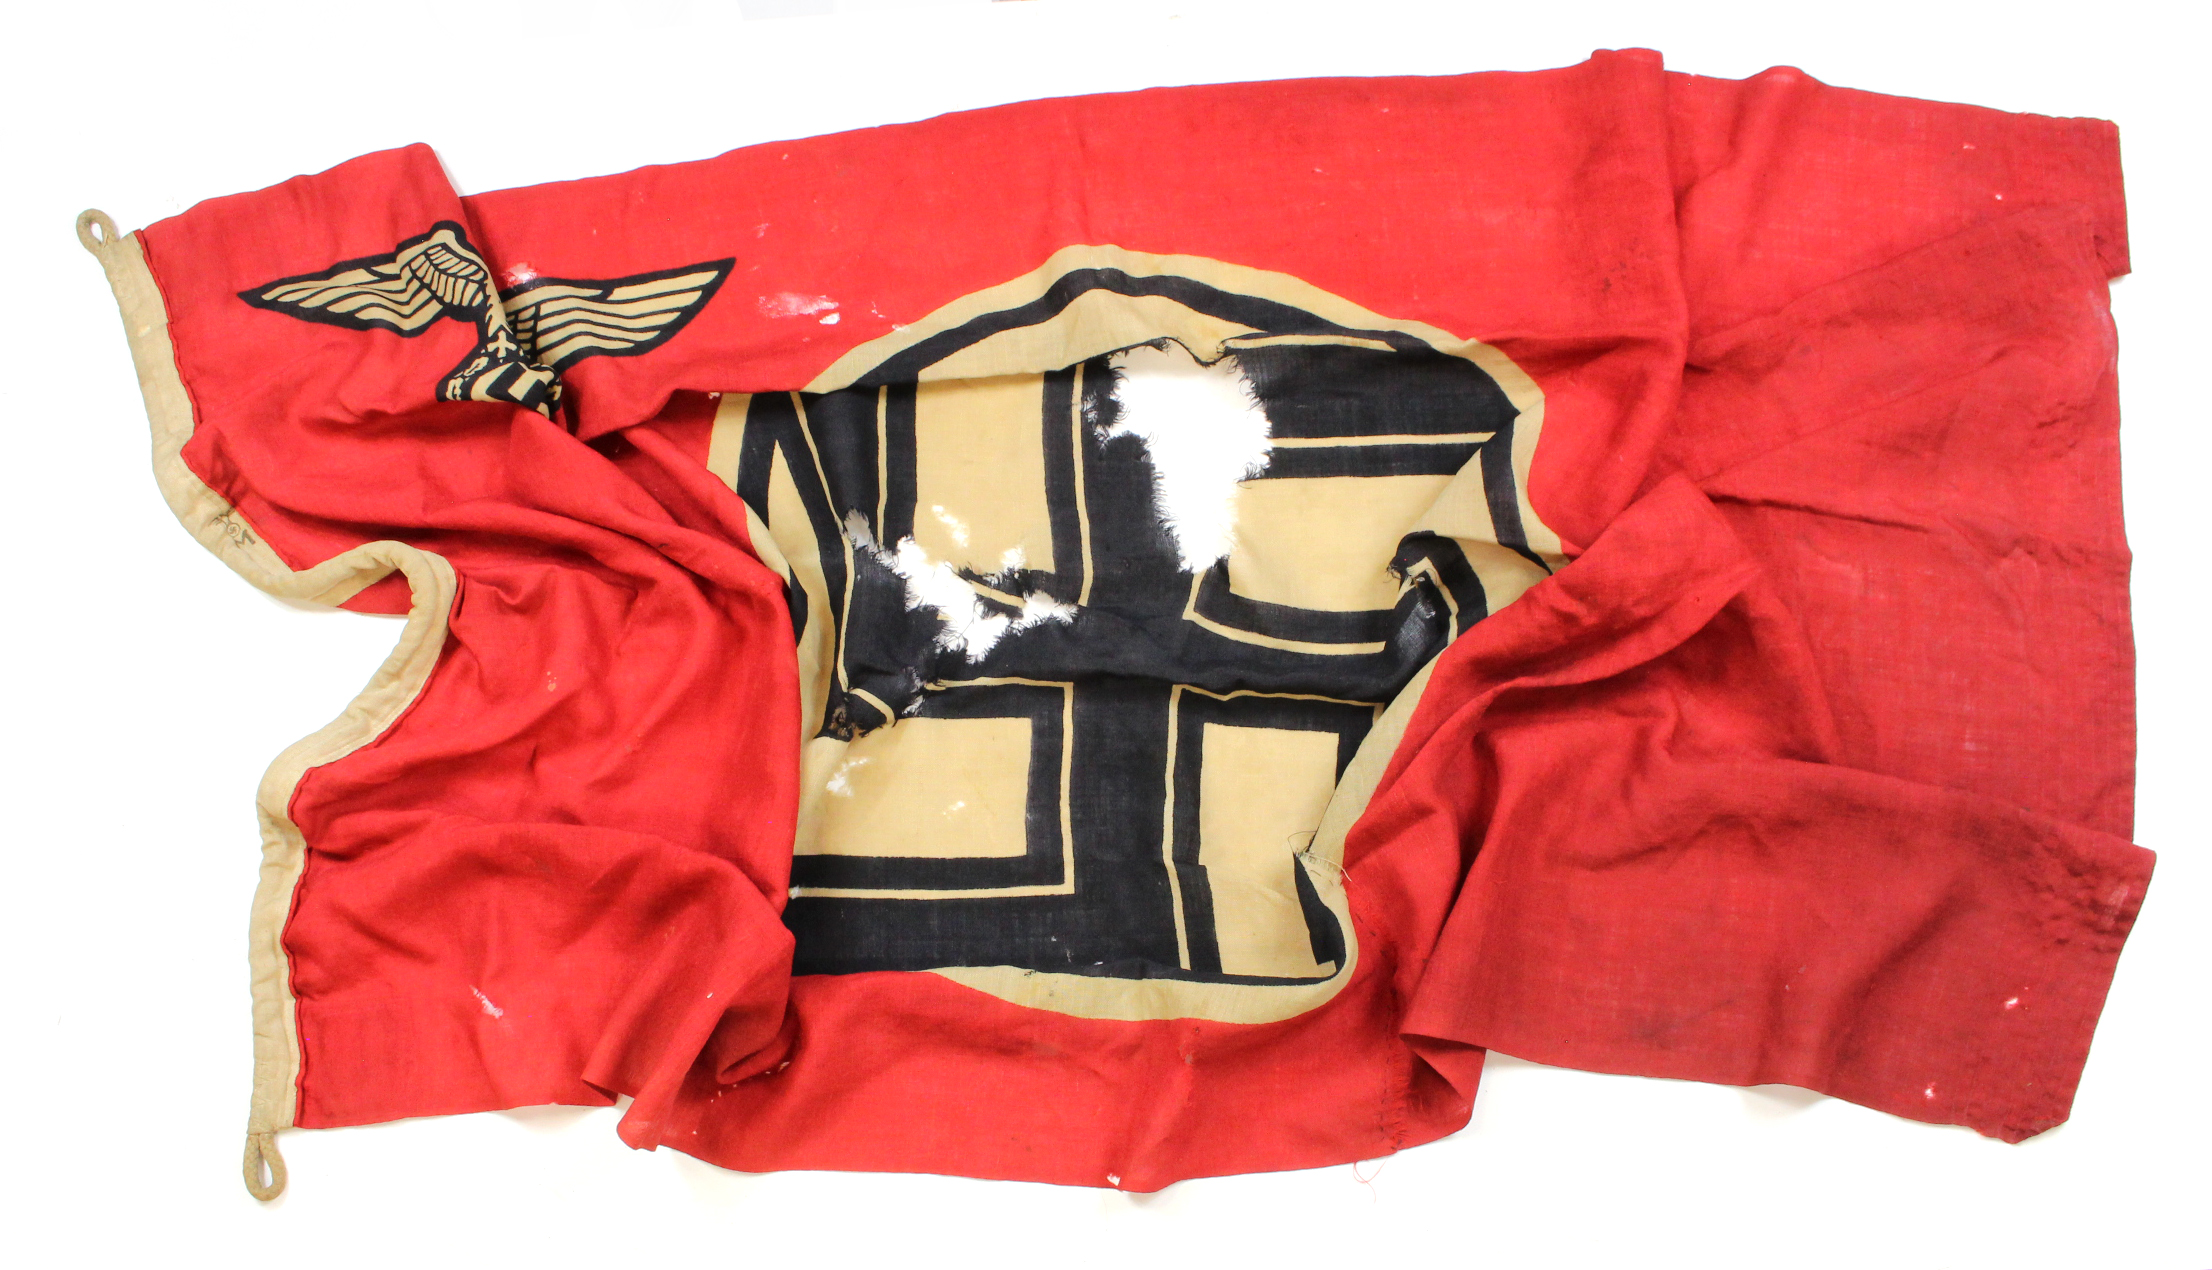 German Nazi large Reich flag in poor condition, vendor states found in a building in Hamburg 1945.